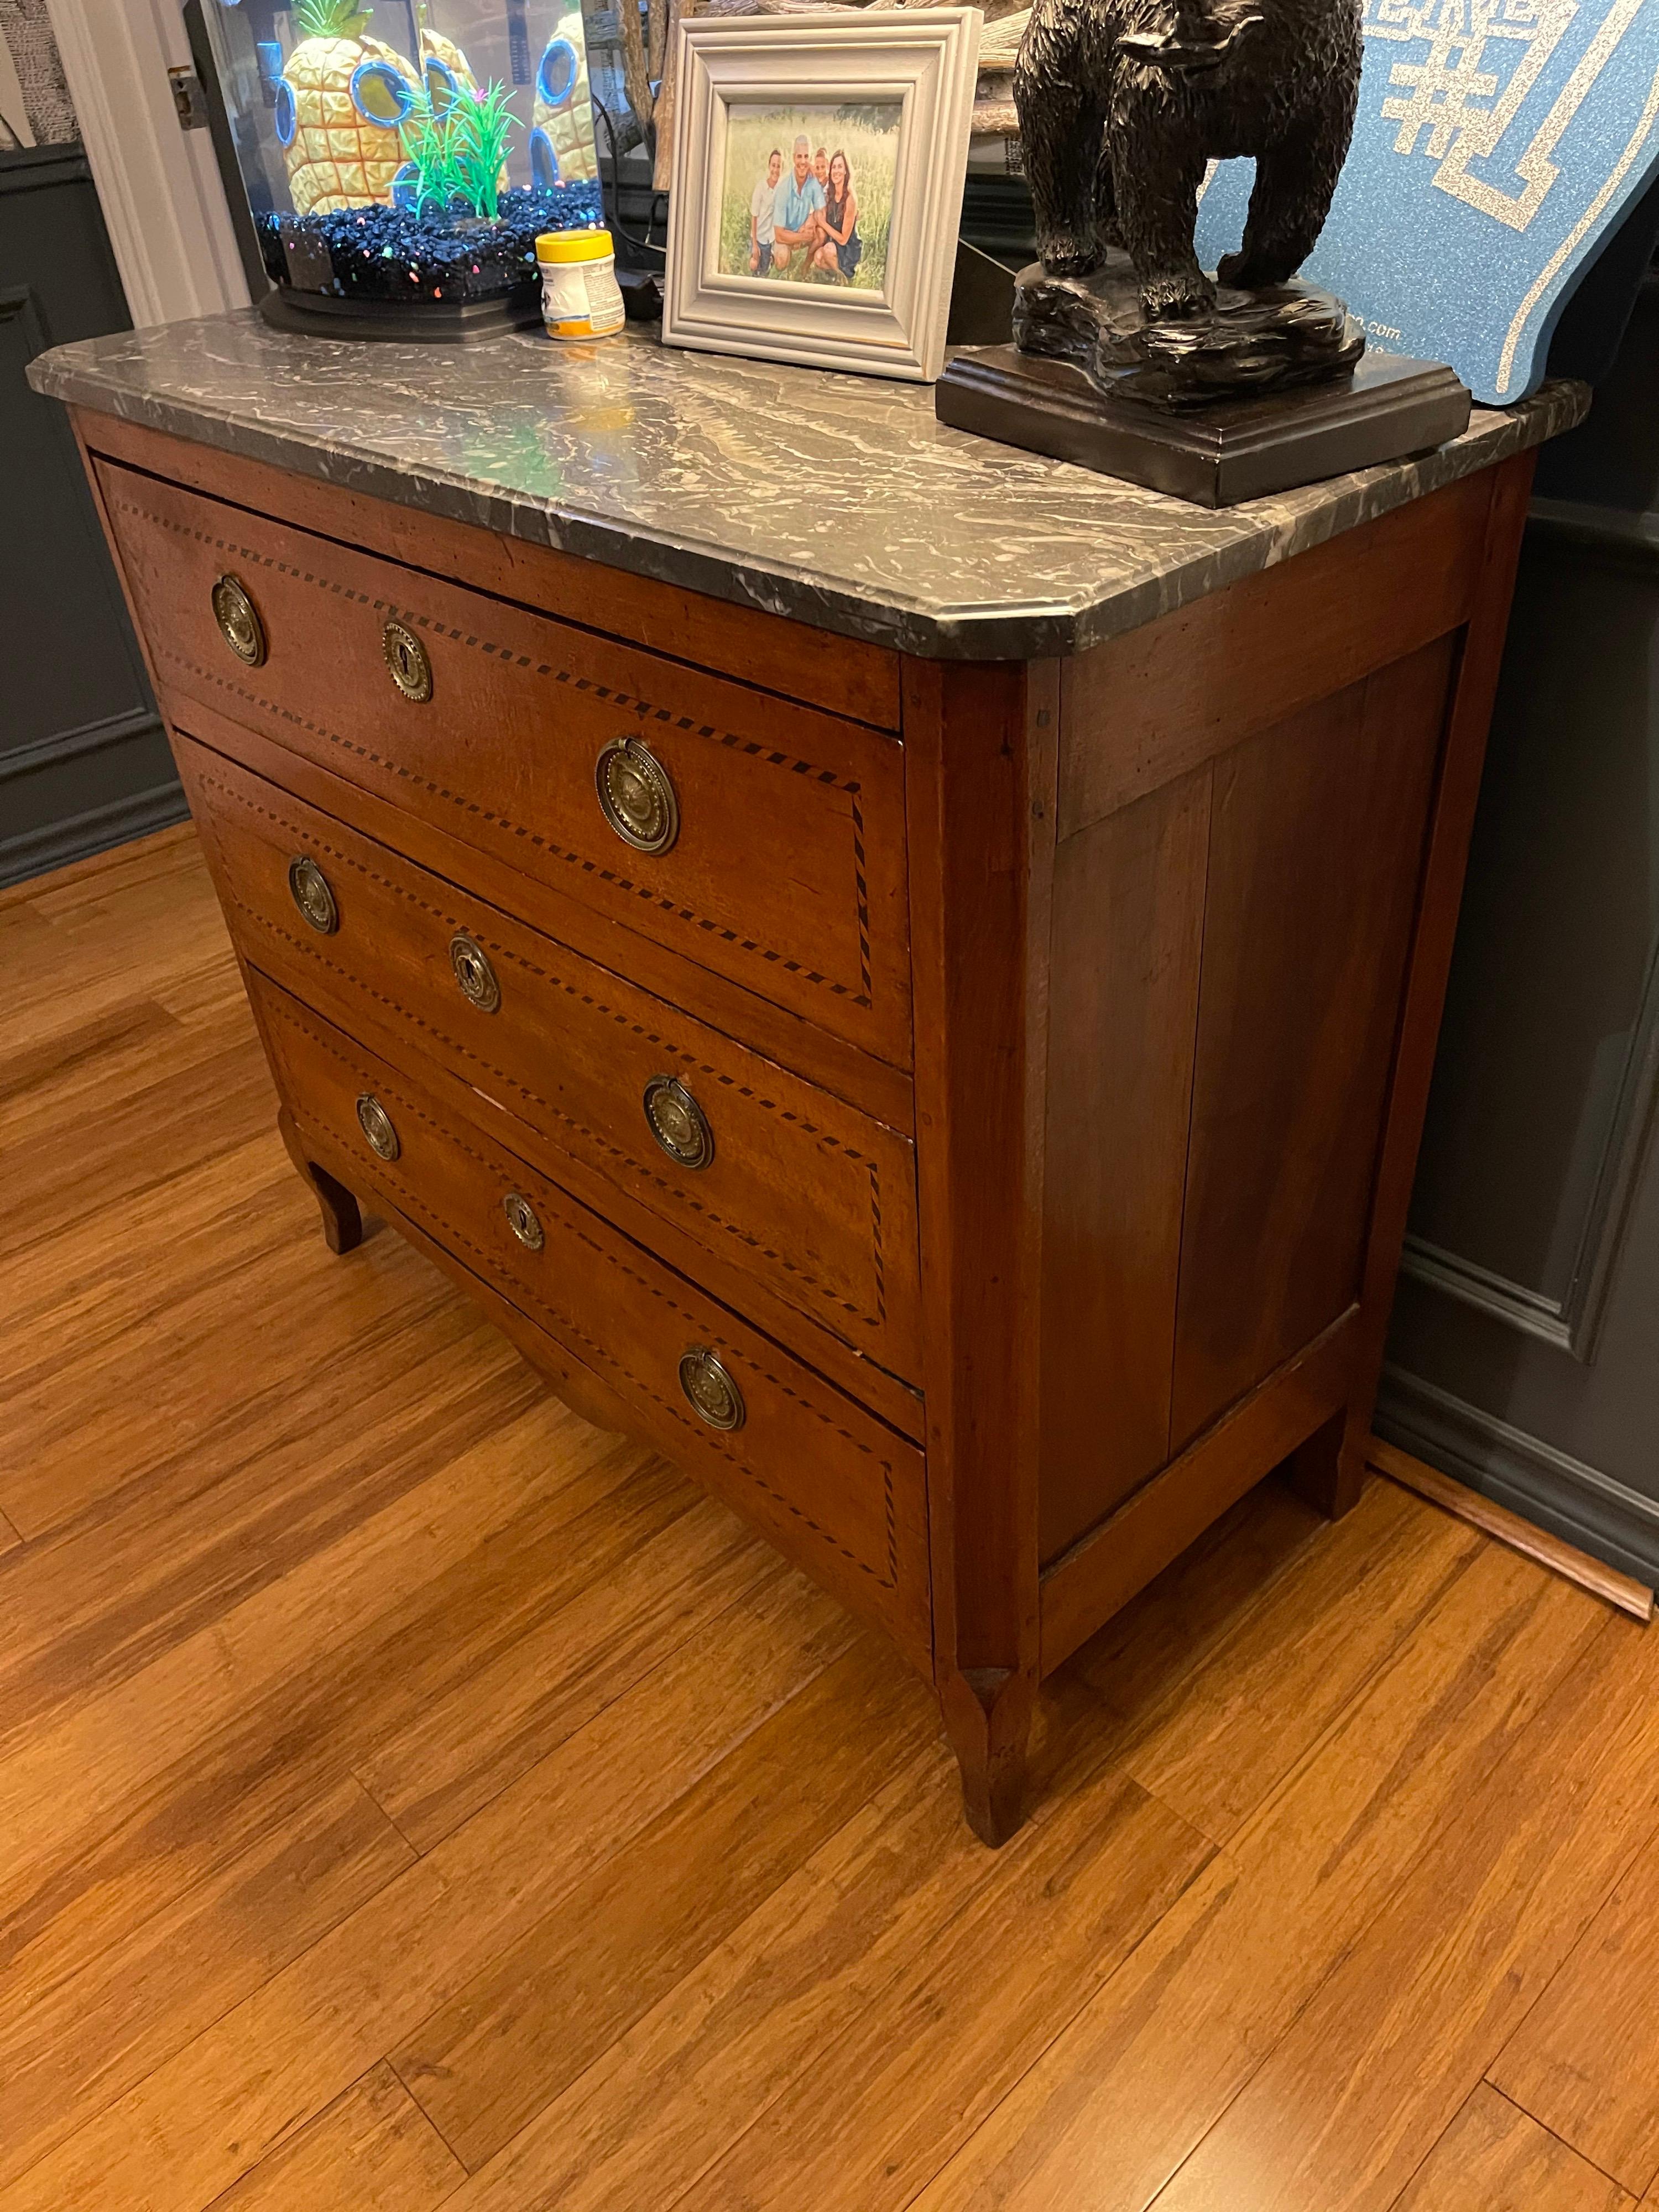 Beautifully patinated French Transitional style mahogany commode with a black marble top above parquetry inlaid accented drawers with original brass pulls and escutcheons. Great traditional look!!